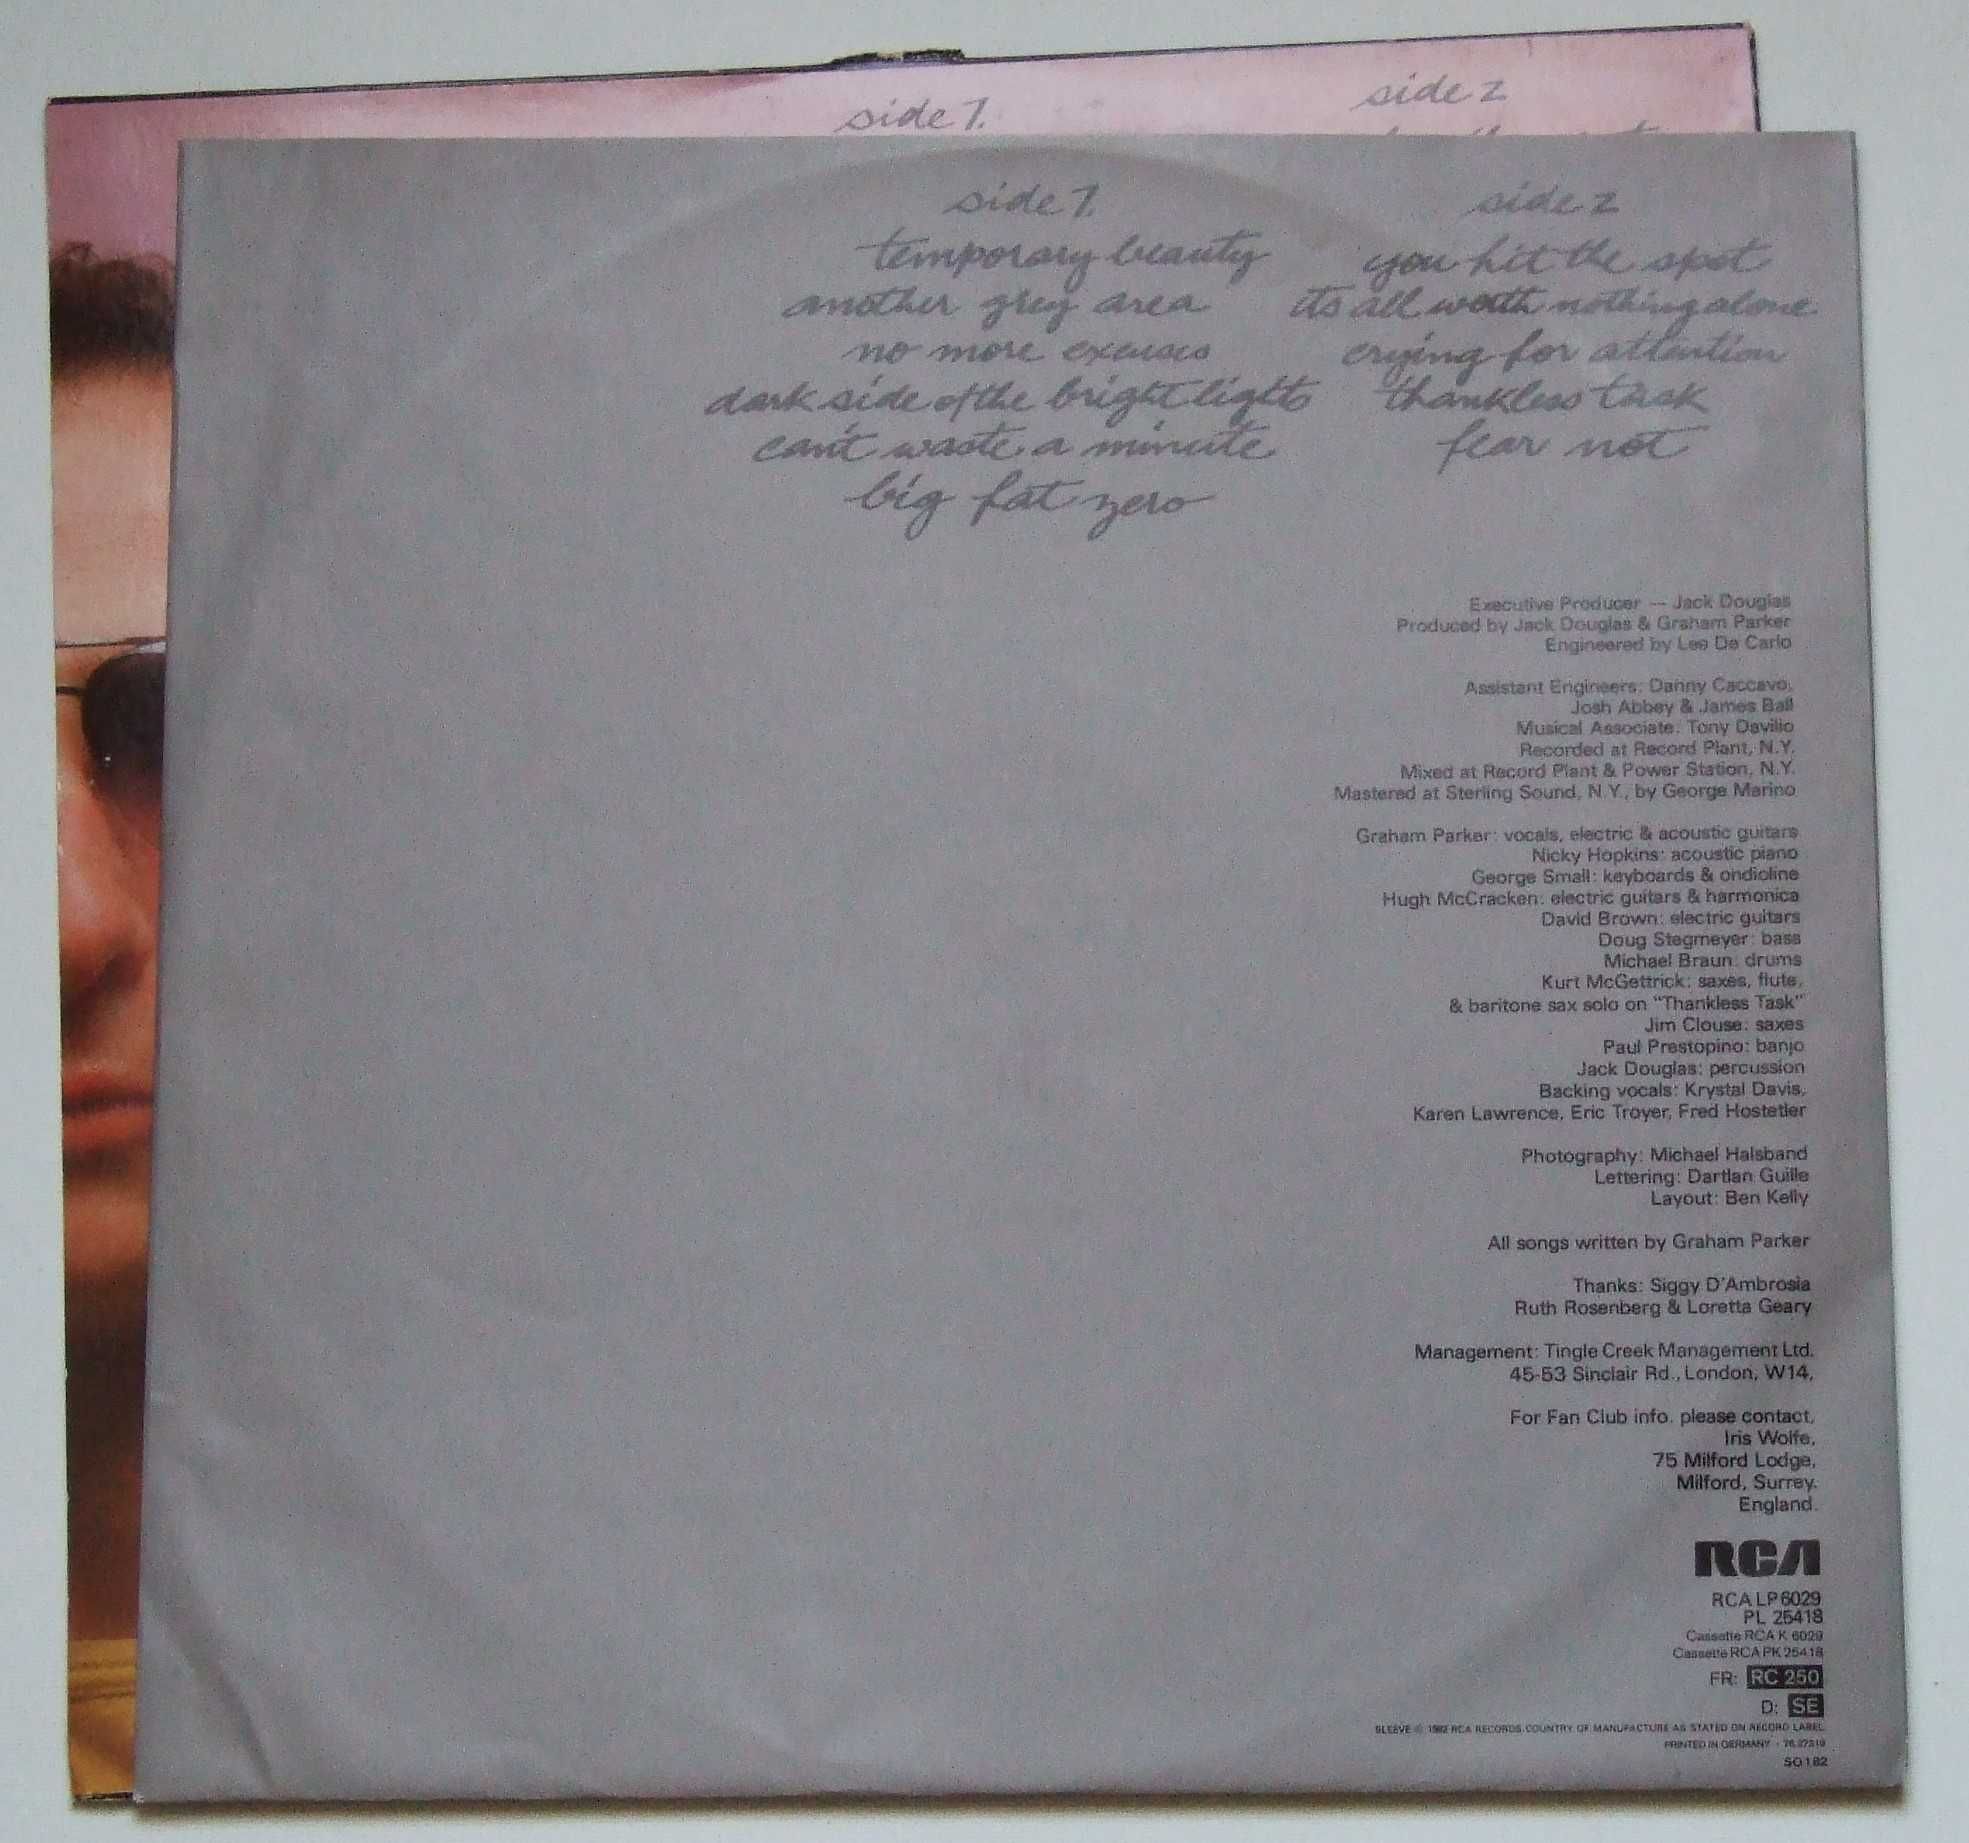 Graham Parker – Another Grey Area